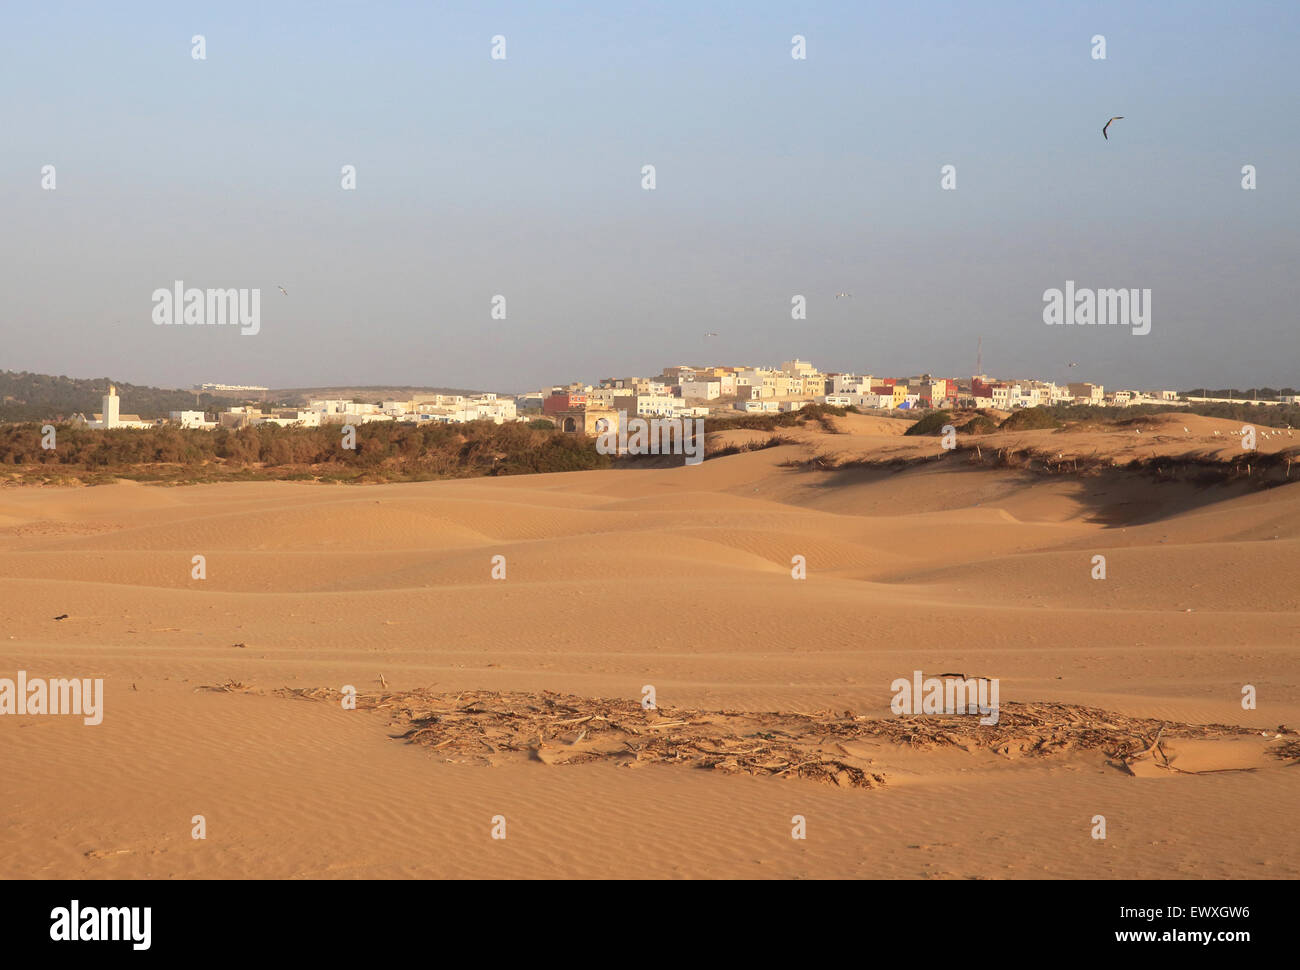 View across the sand dunes of Diabat, the little hippy town of the 60's, where Jimi Hendrix stayed, near Essaouira, Morocco Stock Photo